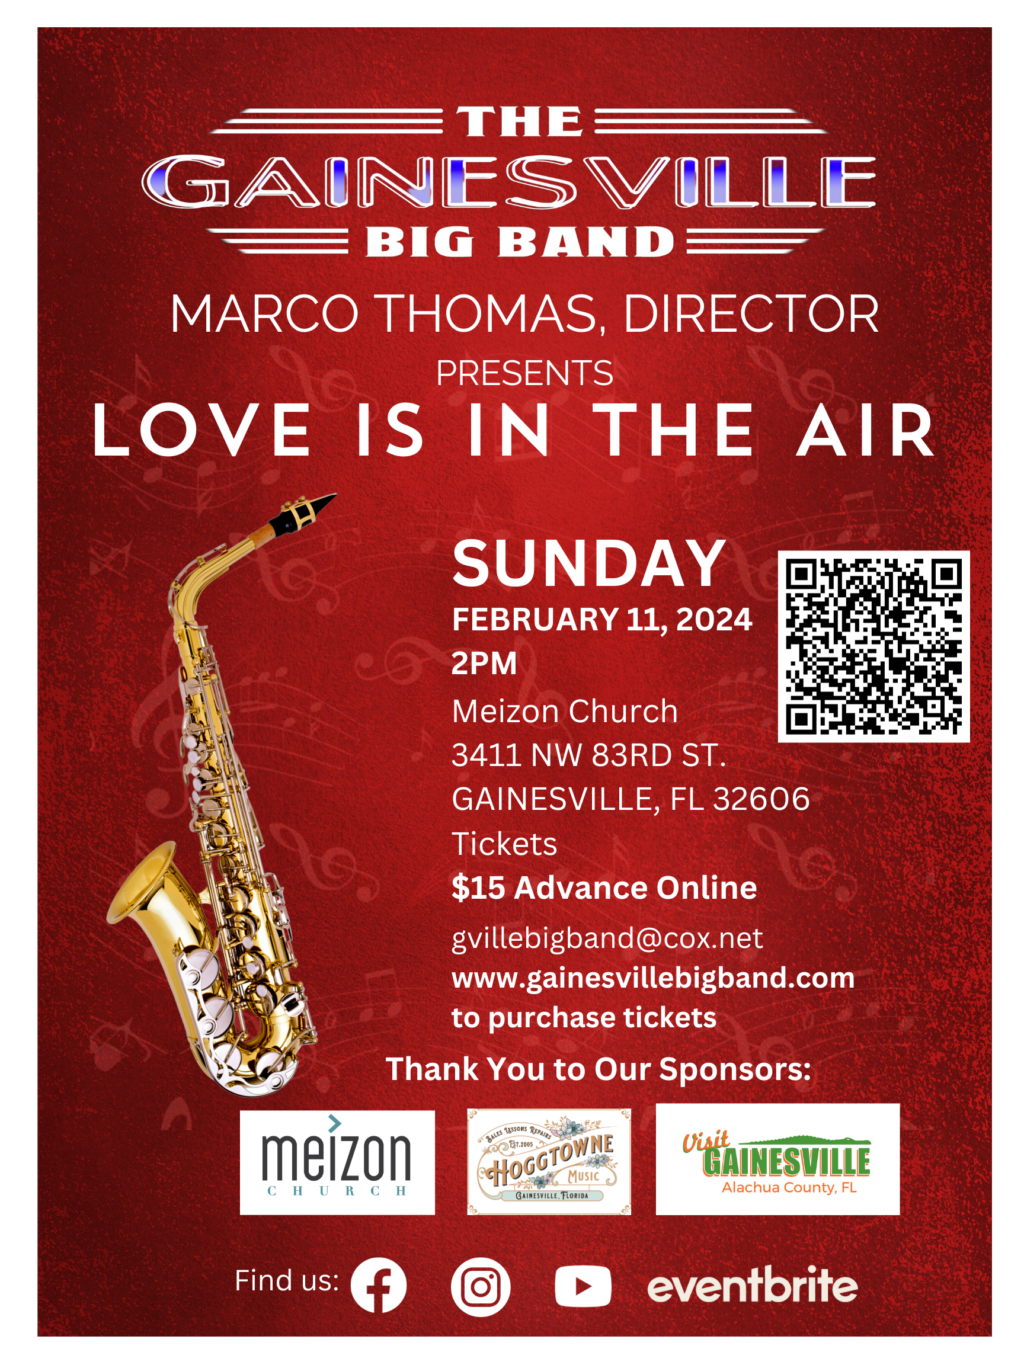 Love is in the air concert poster